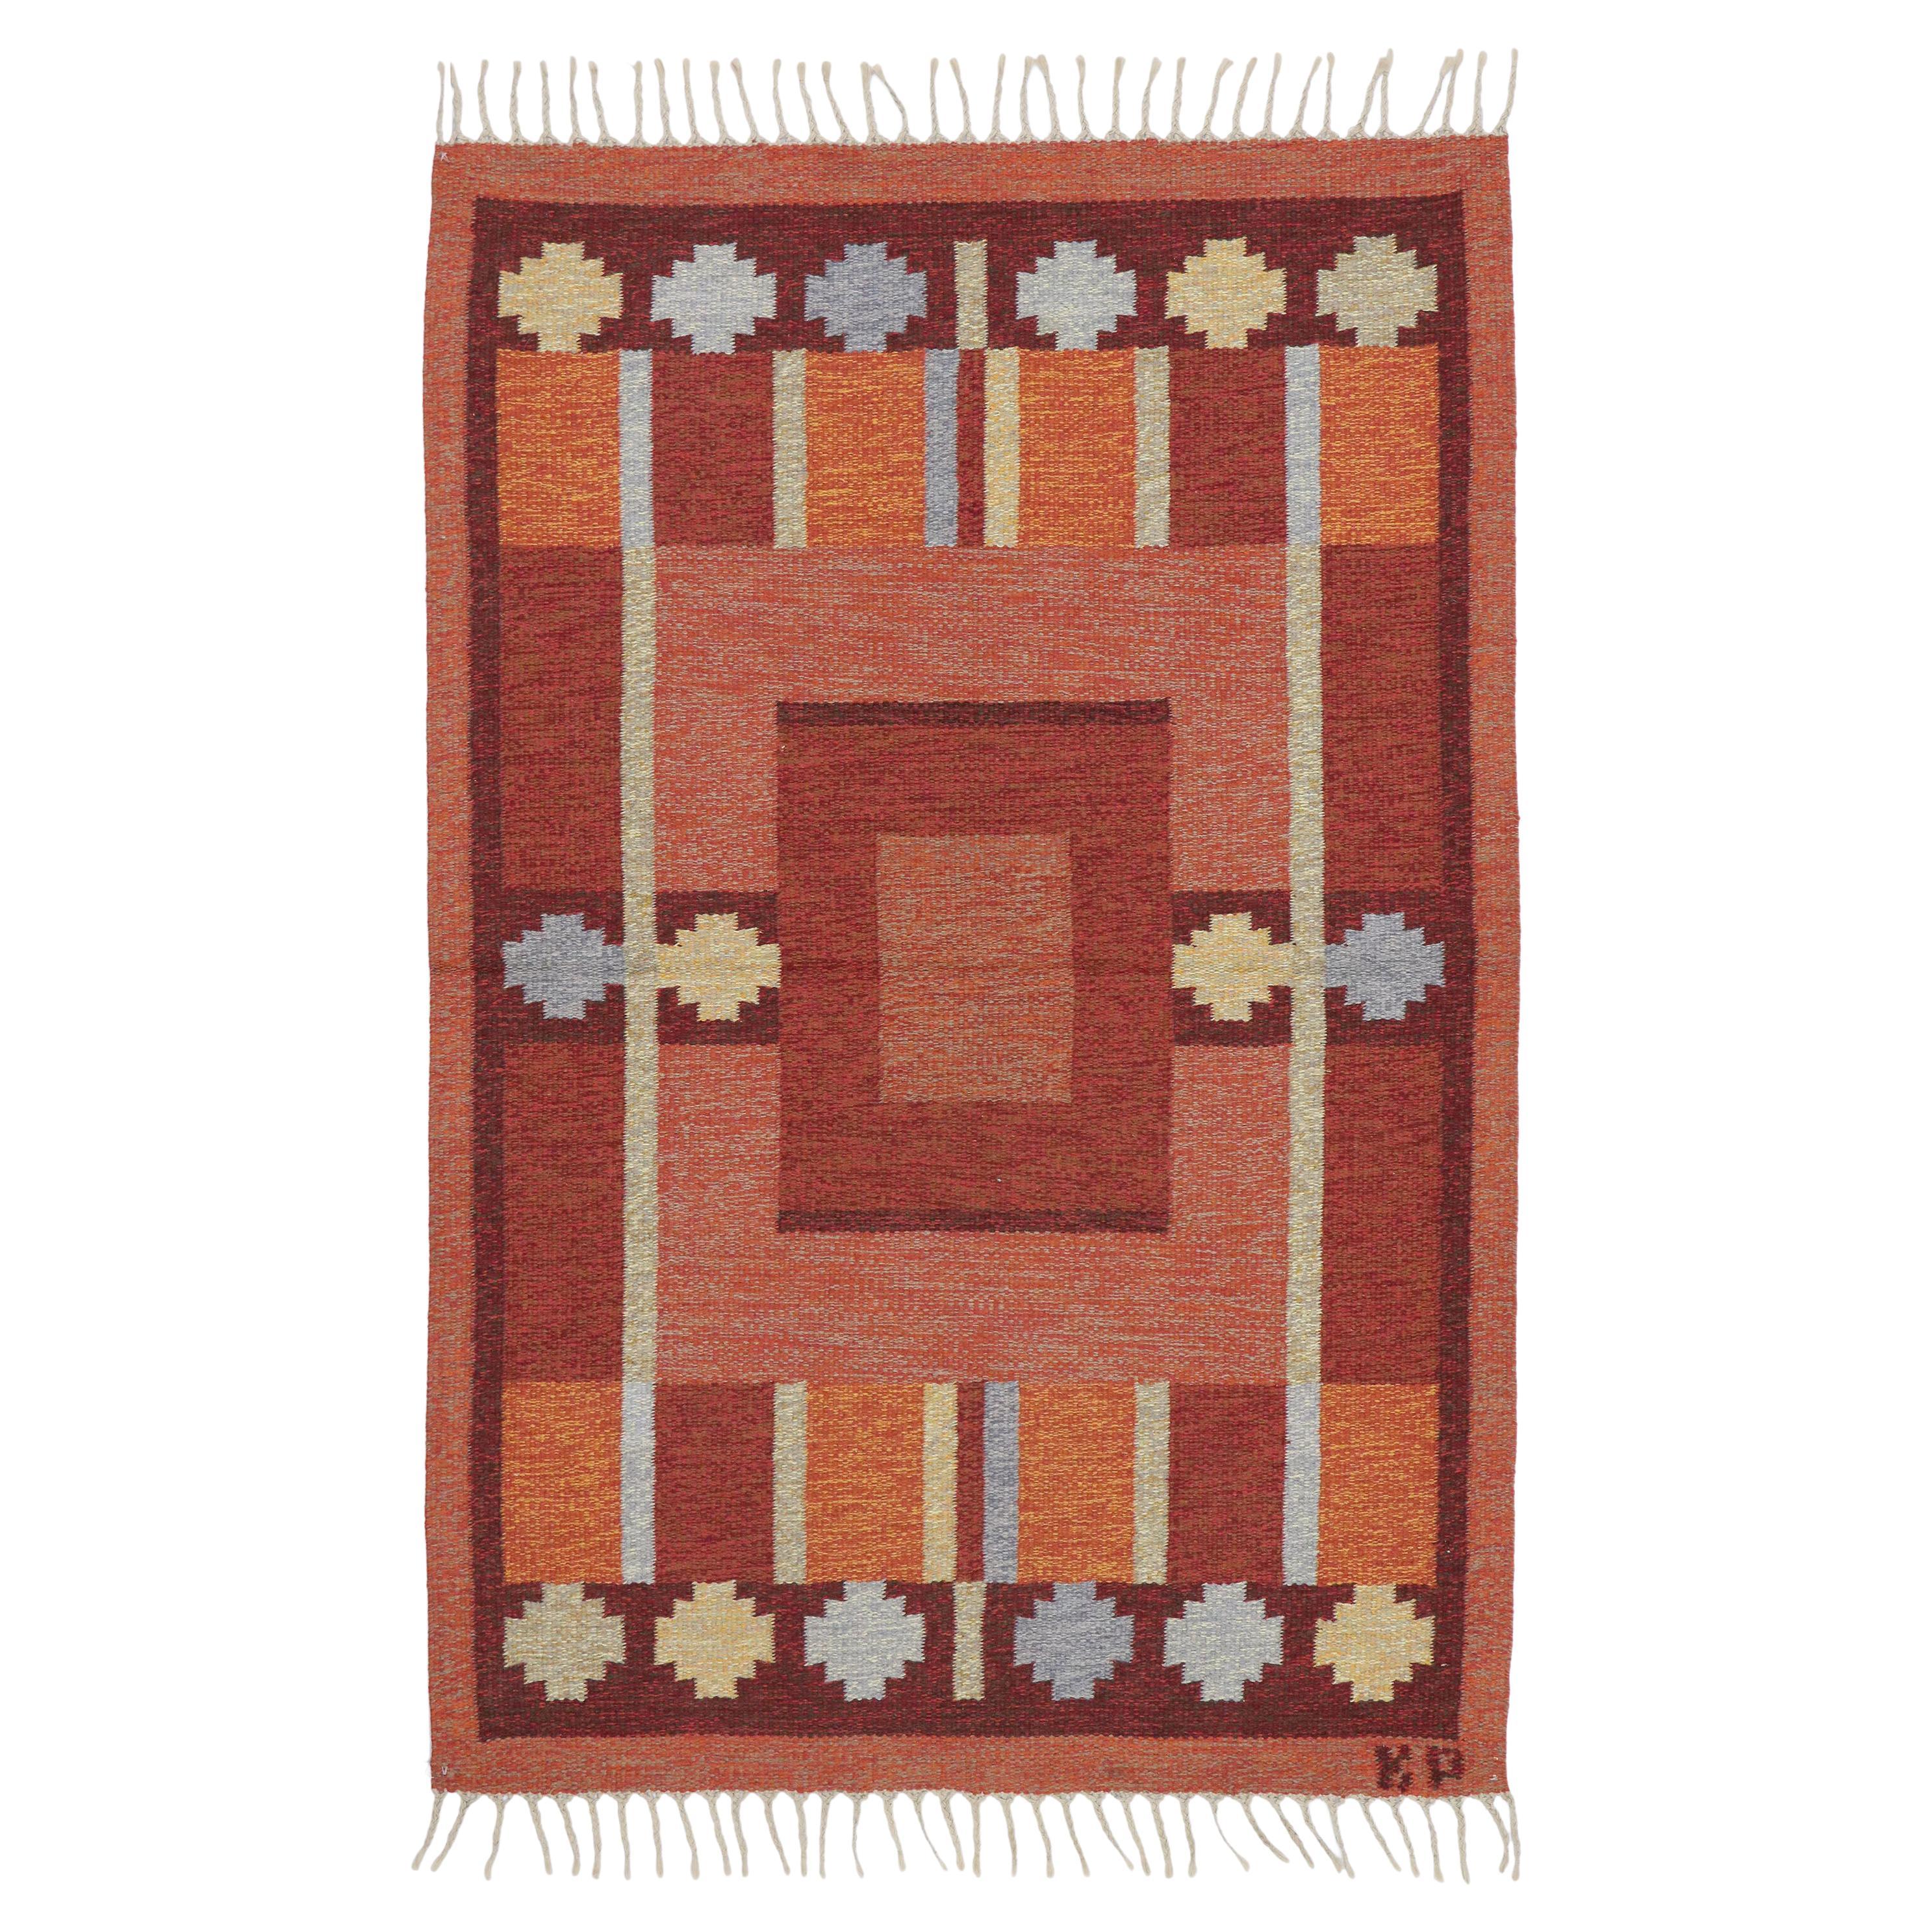 Vintage Swedish Kilim Rug with Scandinavian Modern Style by Kerstin Persson 